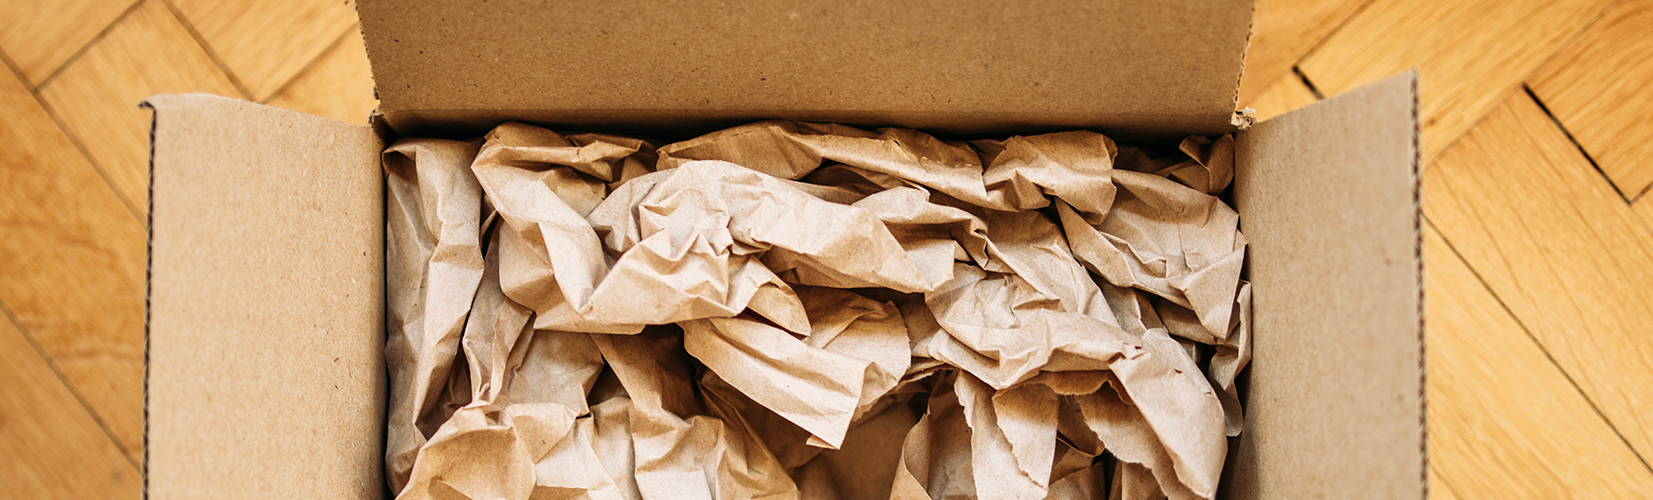 Packaging and shipping paper products to protect them from damage